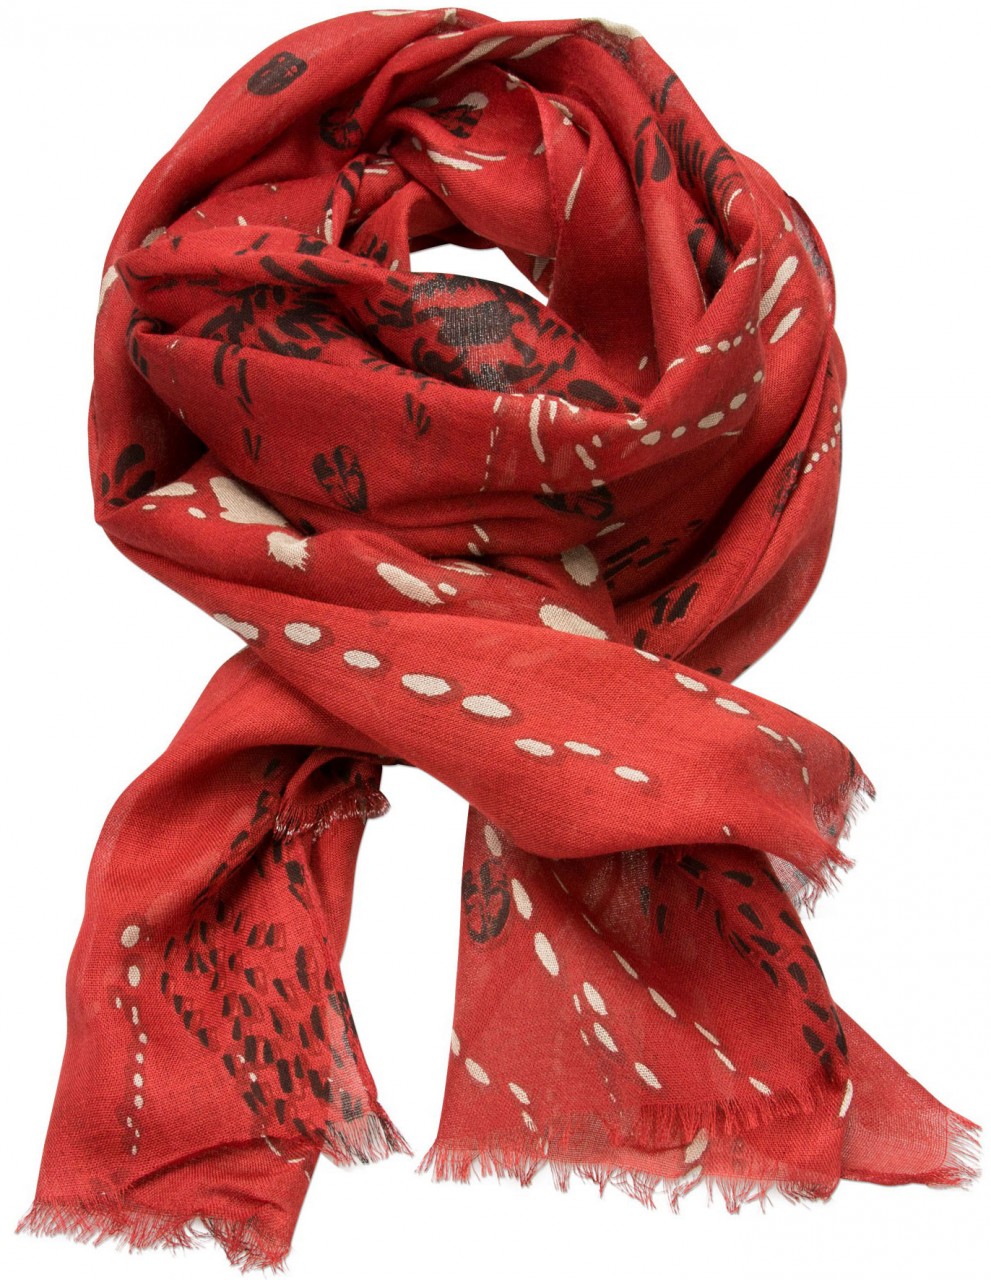 Trachten Scarf with Deer-Print, Red